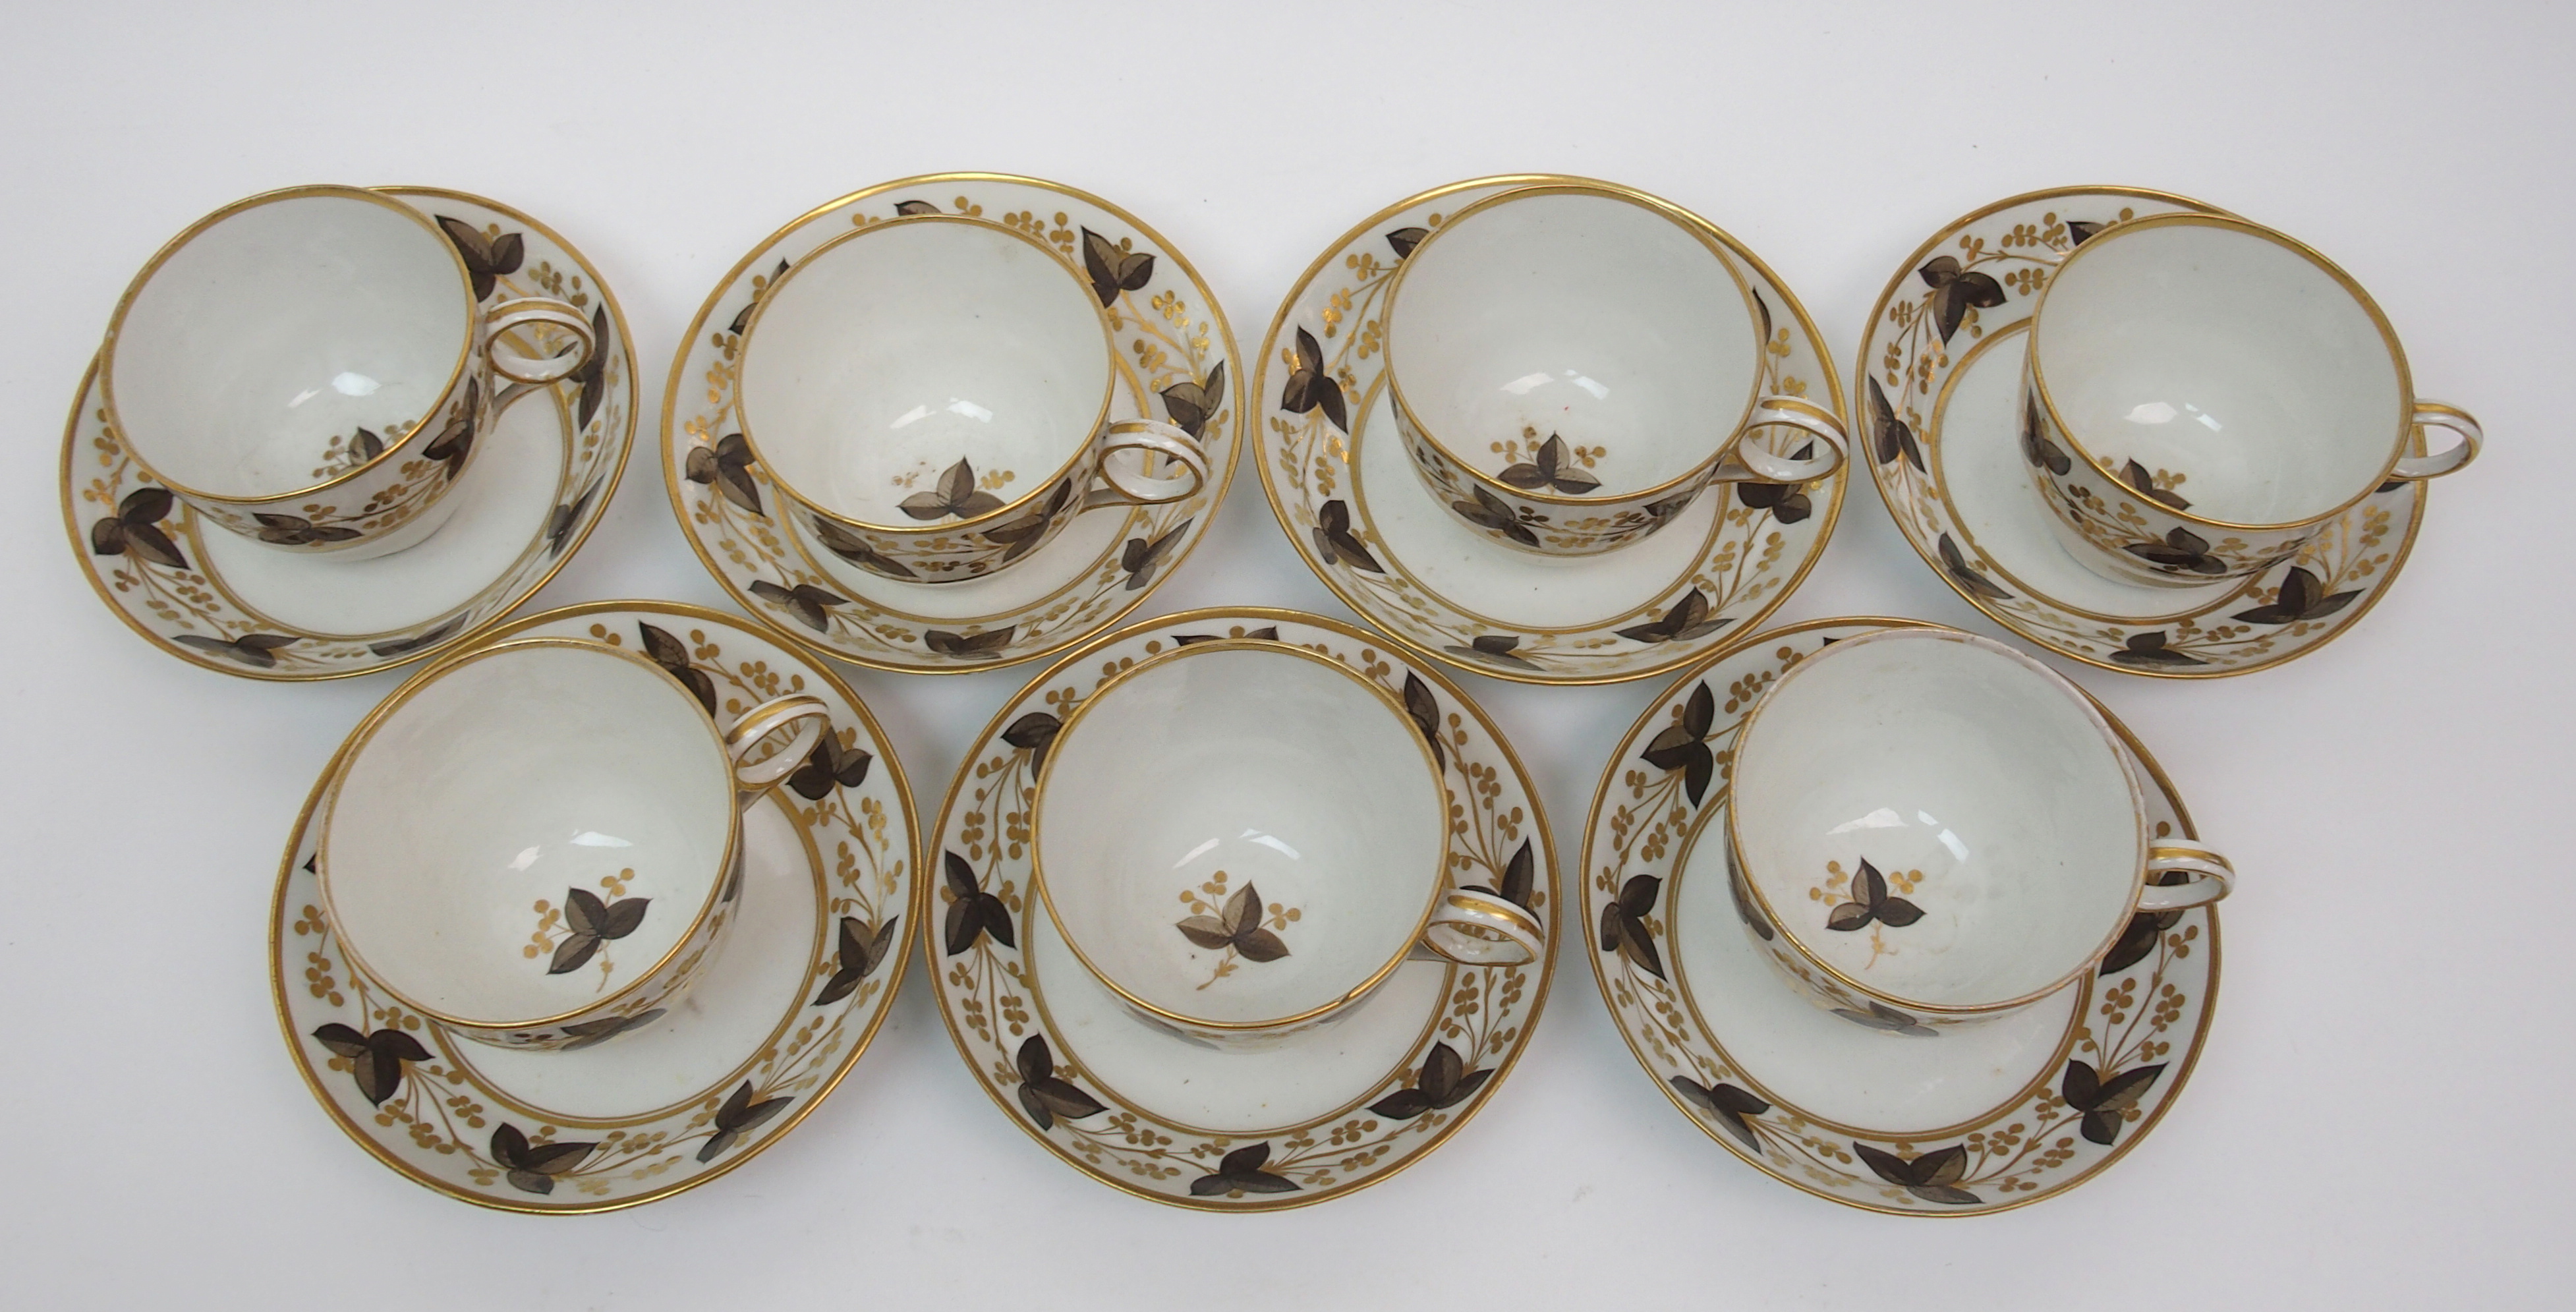 An early 19th Century Chamberlains Worcester porcelain part tea and coffee service painted in - Image 10 of 10